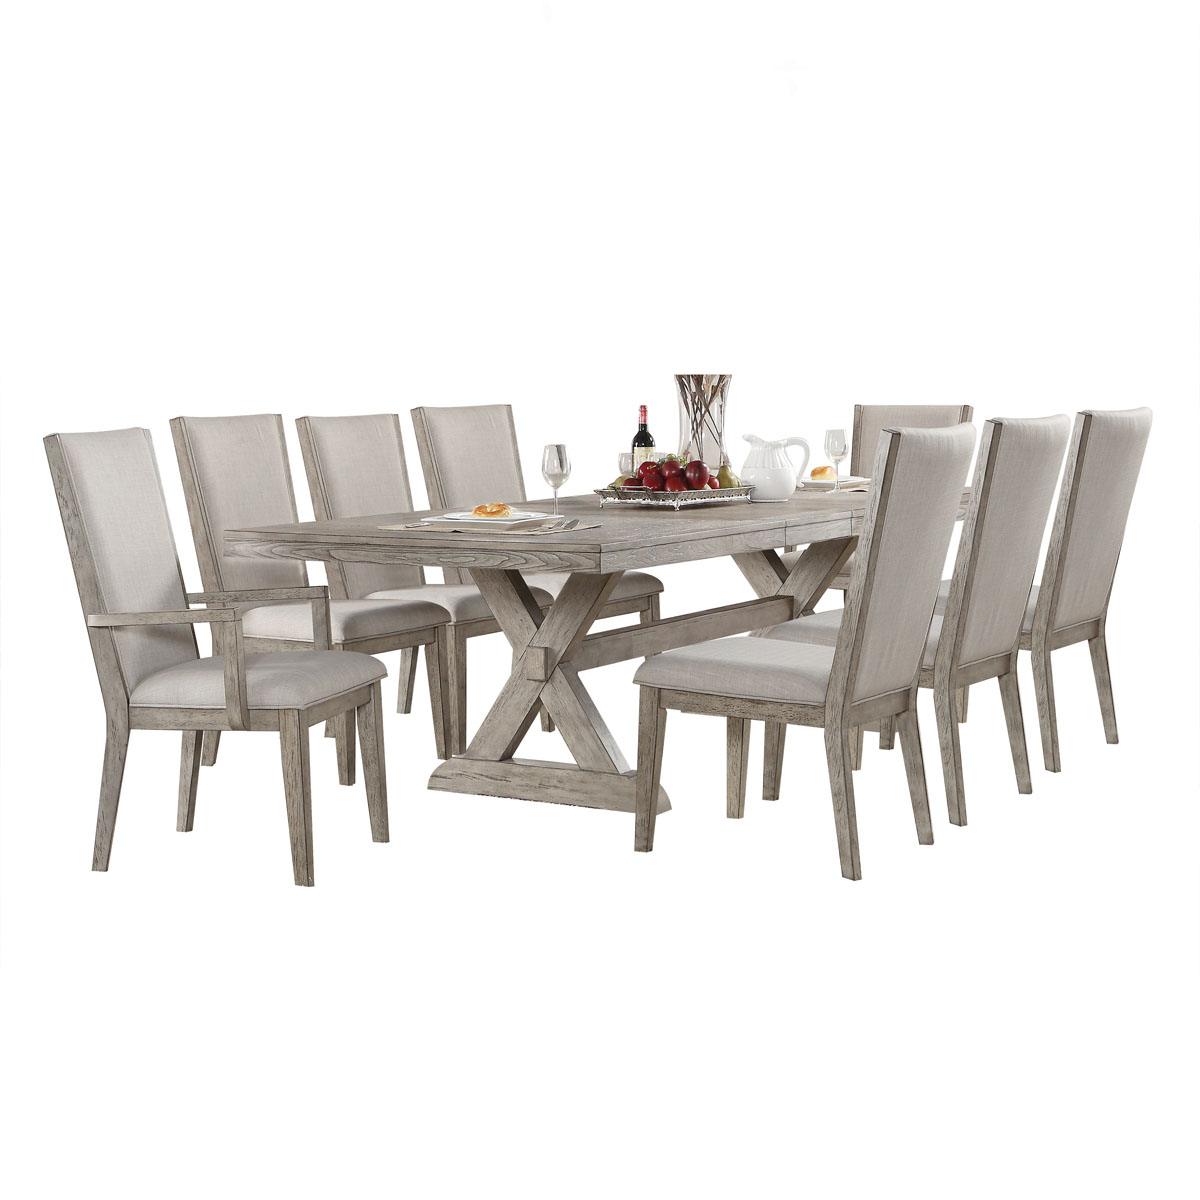 Merced 82"-118" Extension Dining Table - Grey Oak